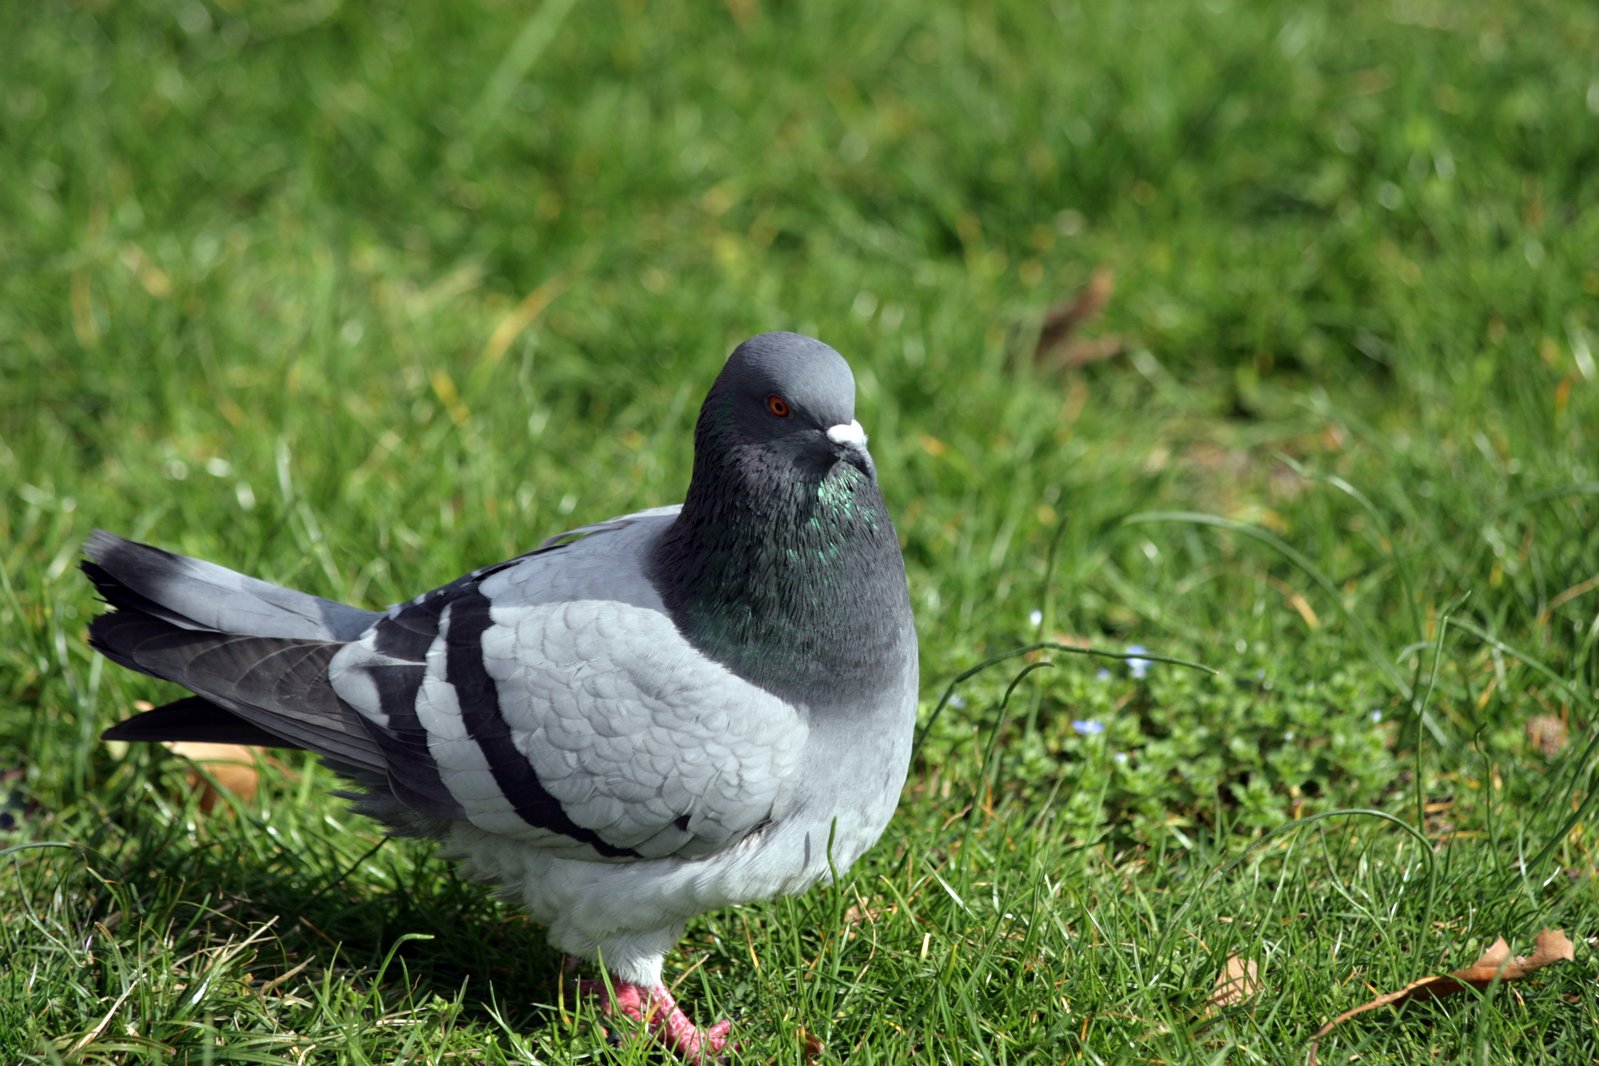 a close up of a pigeon in the grass